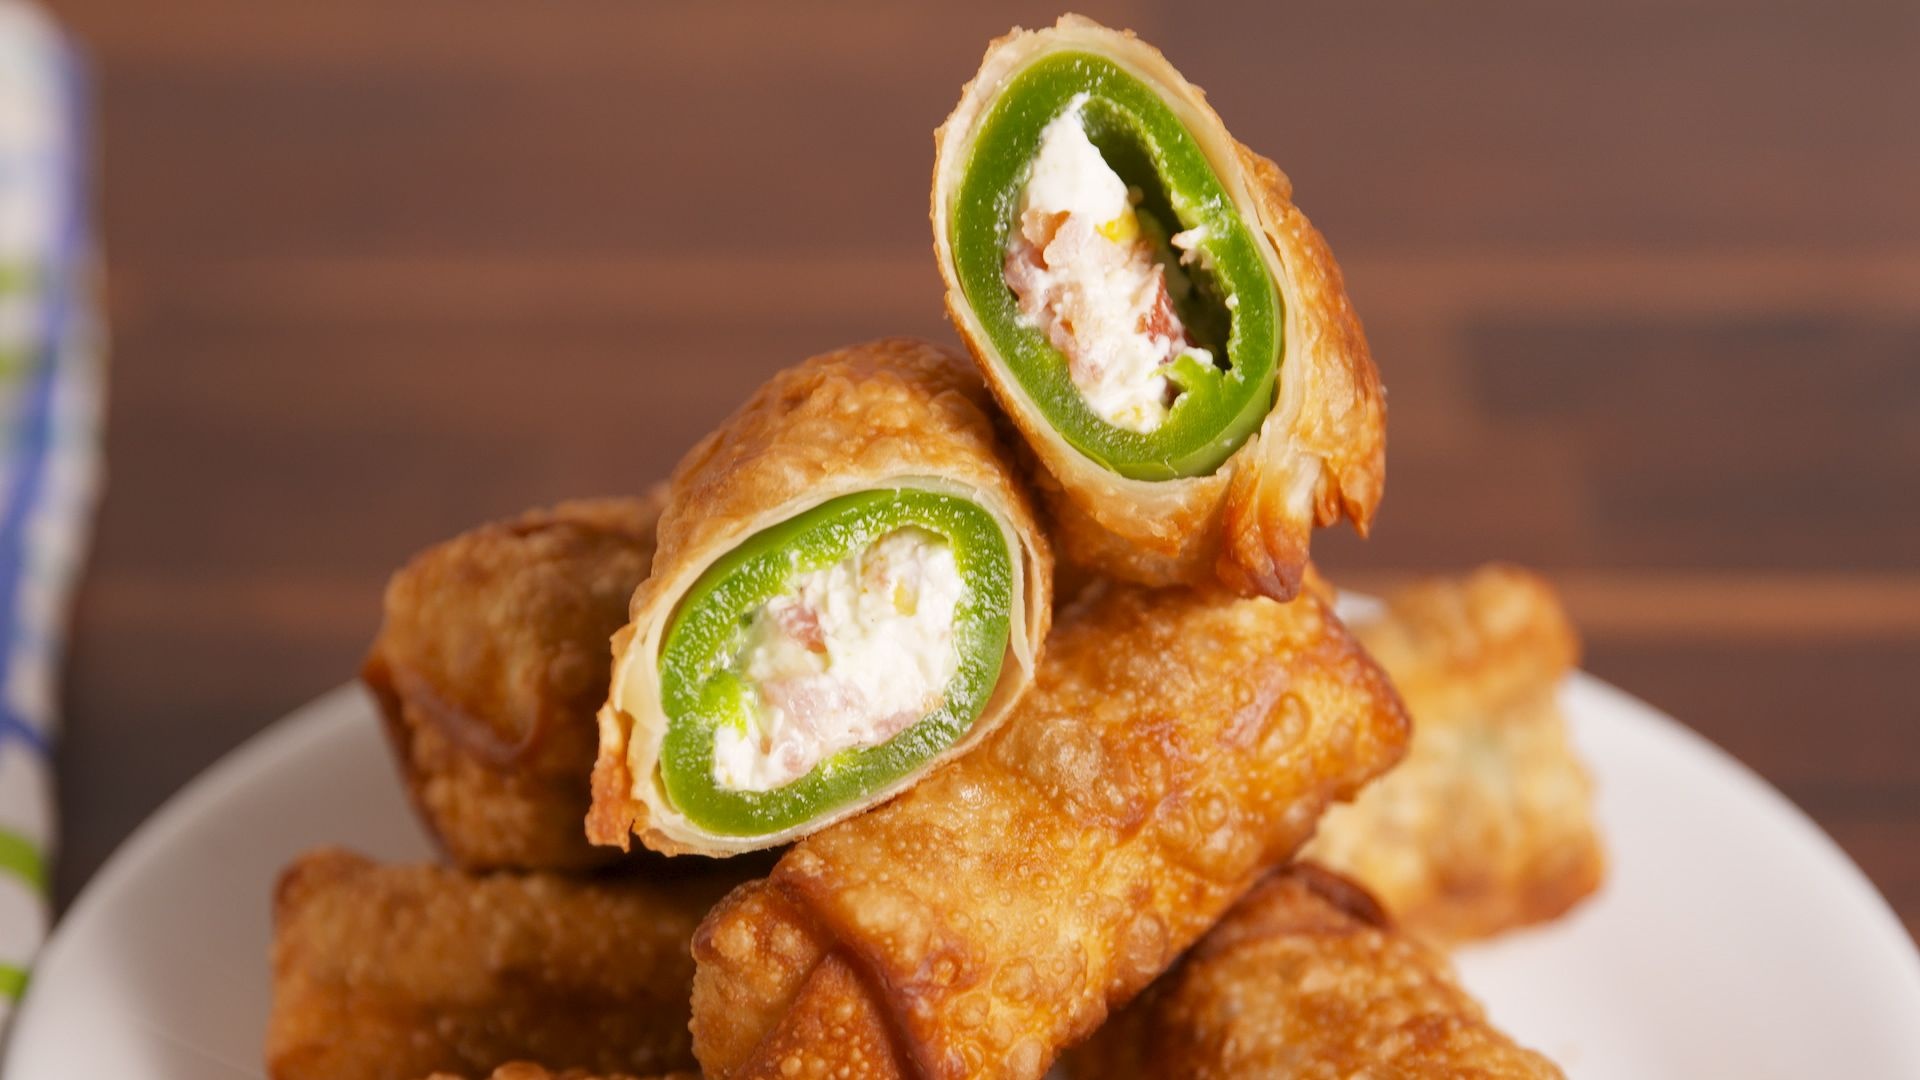 Best jalapeo popper egg rolls, Spicy fusion appetizer, Irresistible snack, Crispy perfection, 1920x1080 Full HD Desktop